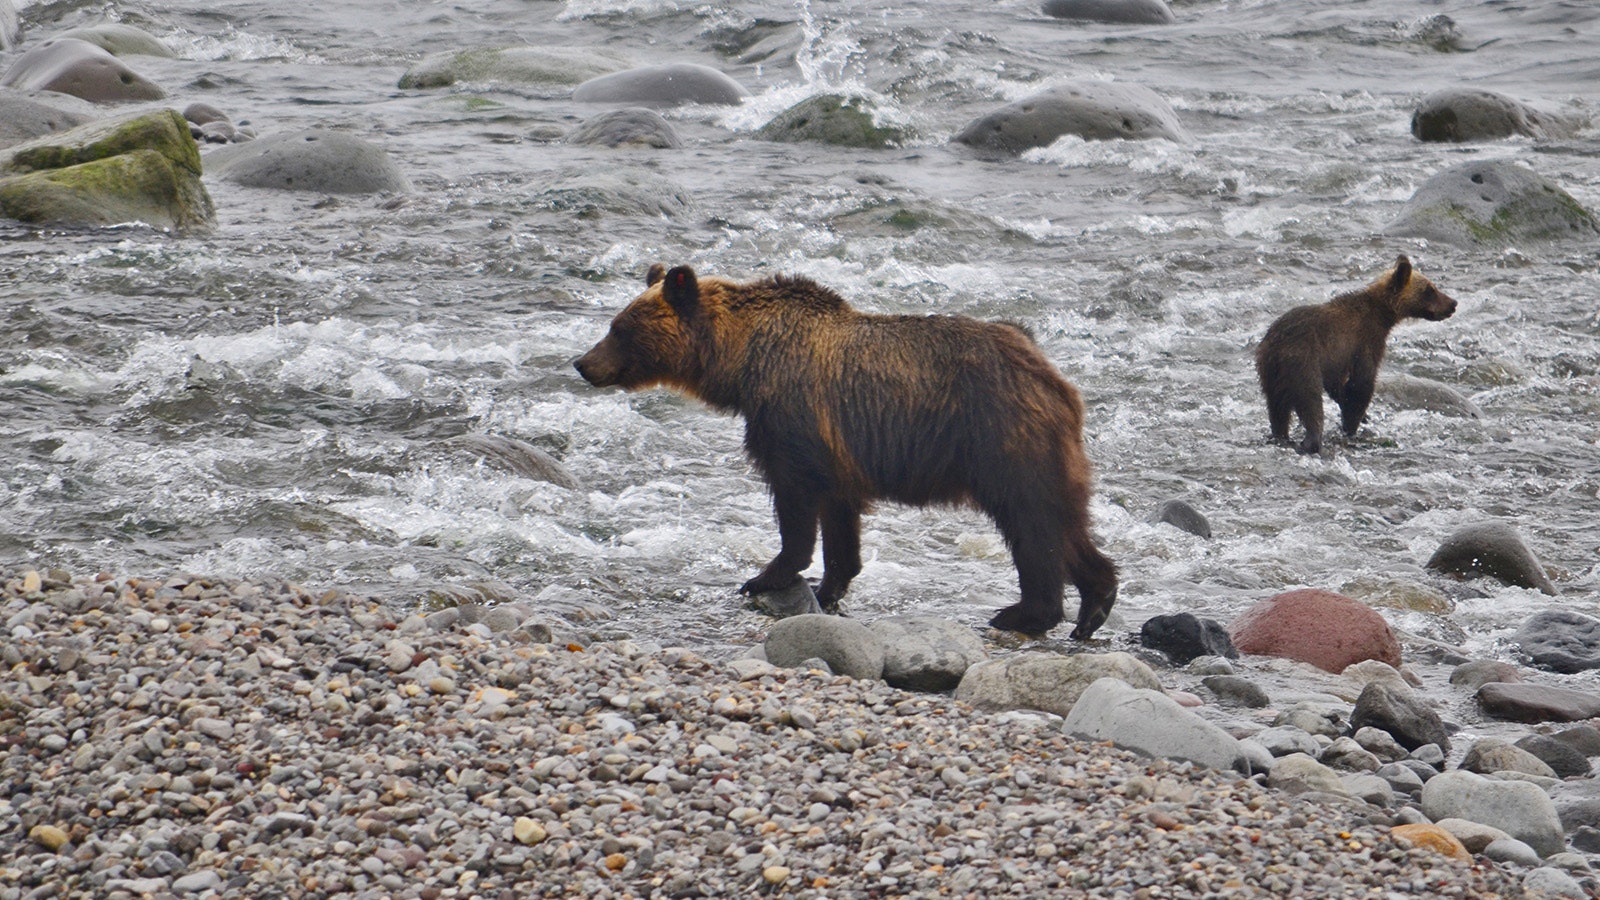 Japan’s brown bears are essentially the same species as Wyoming’s grizzlies. This mother and cub were skinny because the late-summer pink salmon run they were waiting for was late.